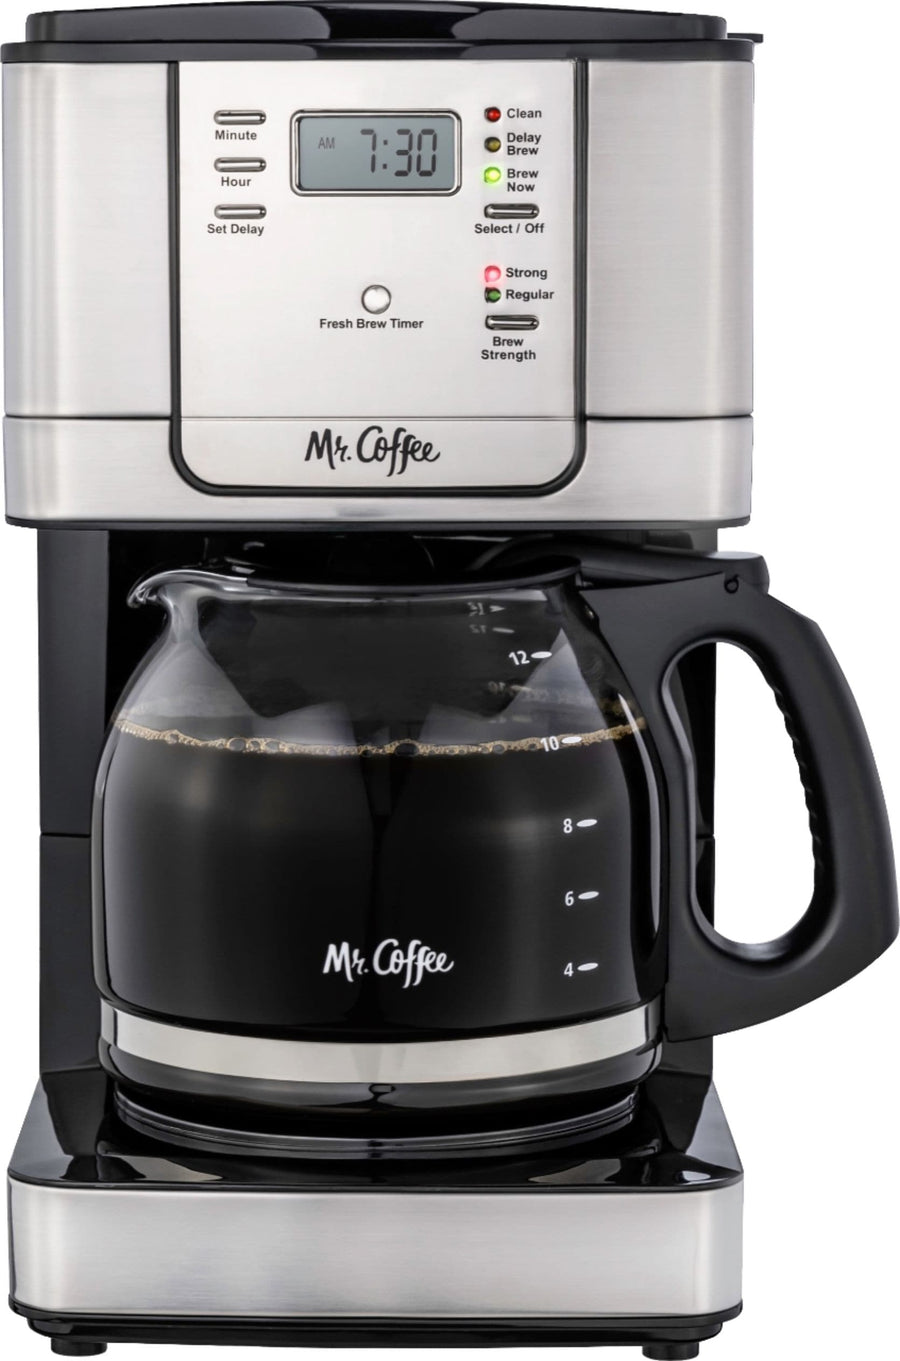 Mr. Coffee - 12-Cup Coffee Maker with Strong Brew Selector - Stainless Steel_0